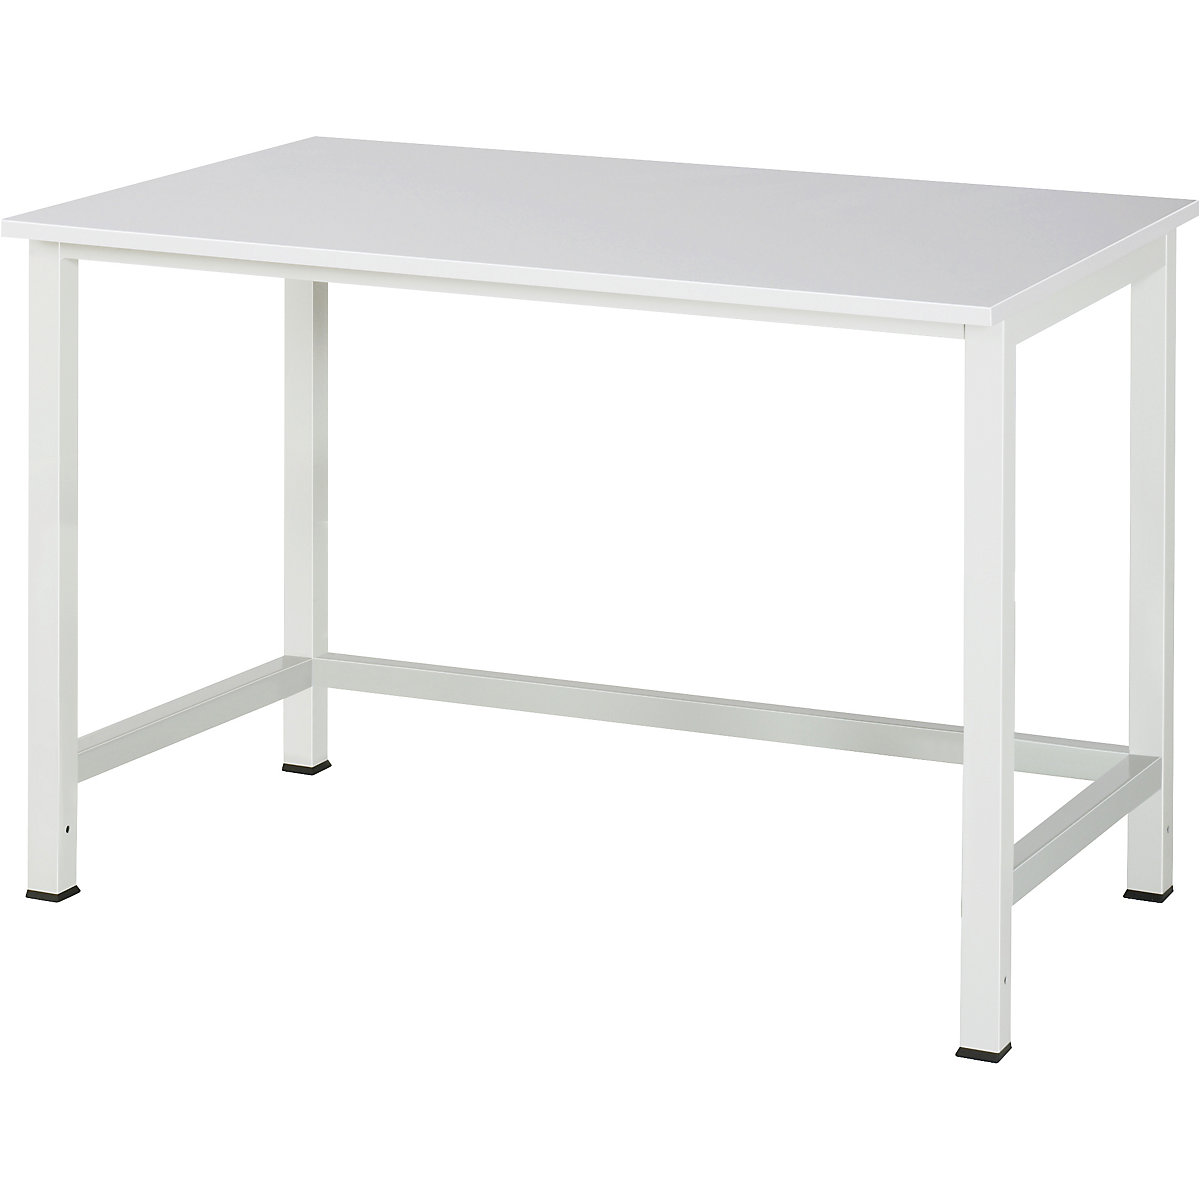 Work table for Series 900 workplace system – RAU, melamine coated, width 1250 mm-5